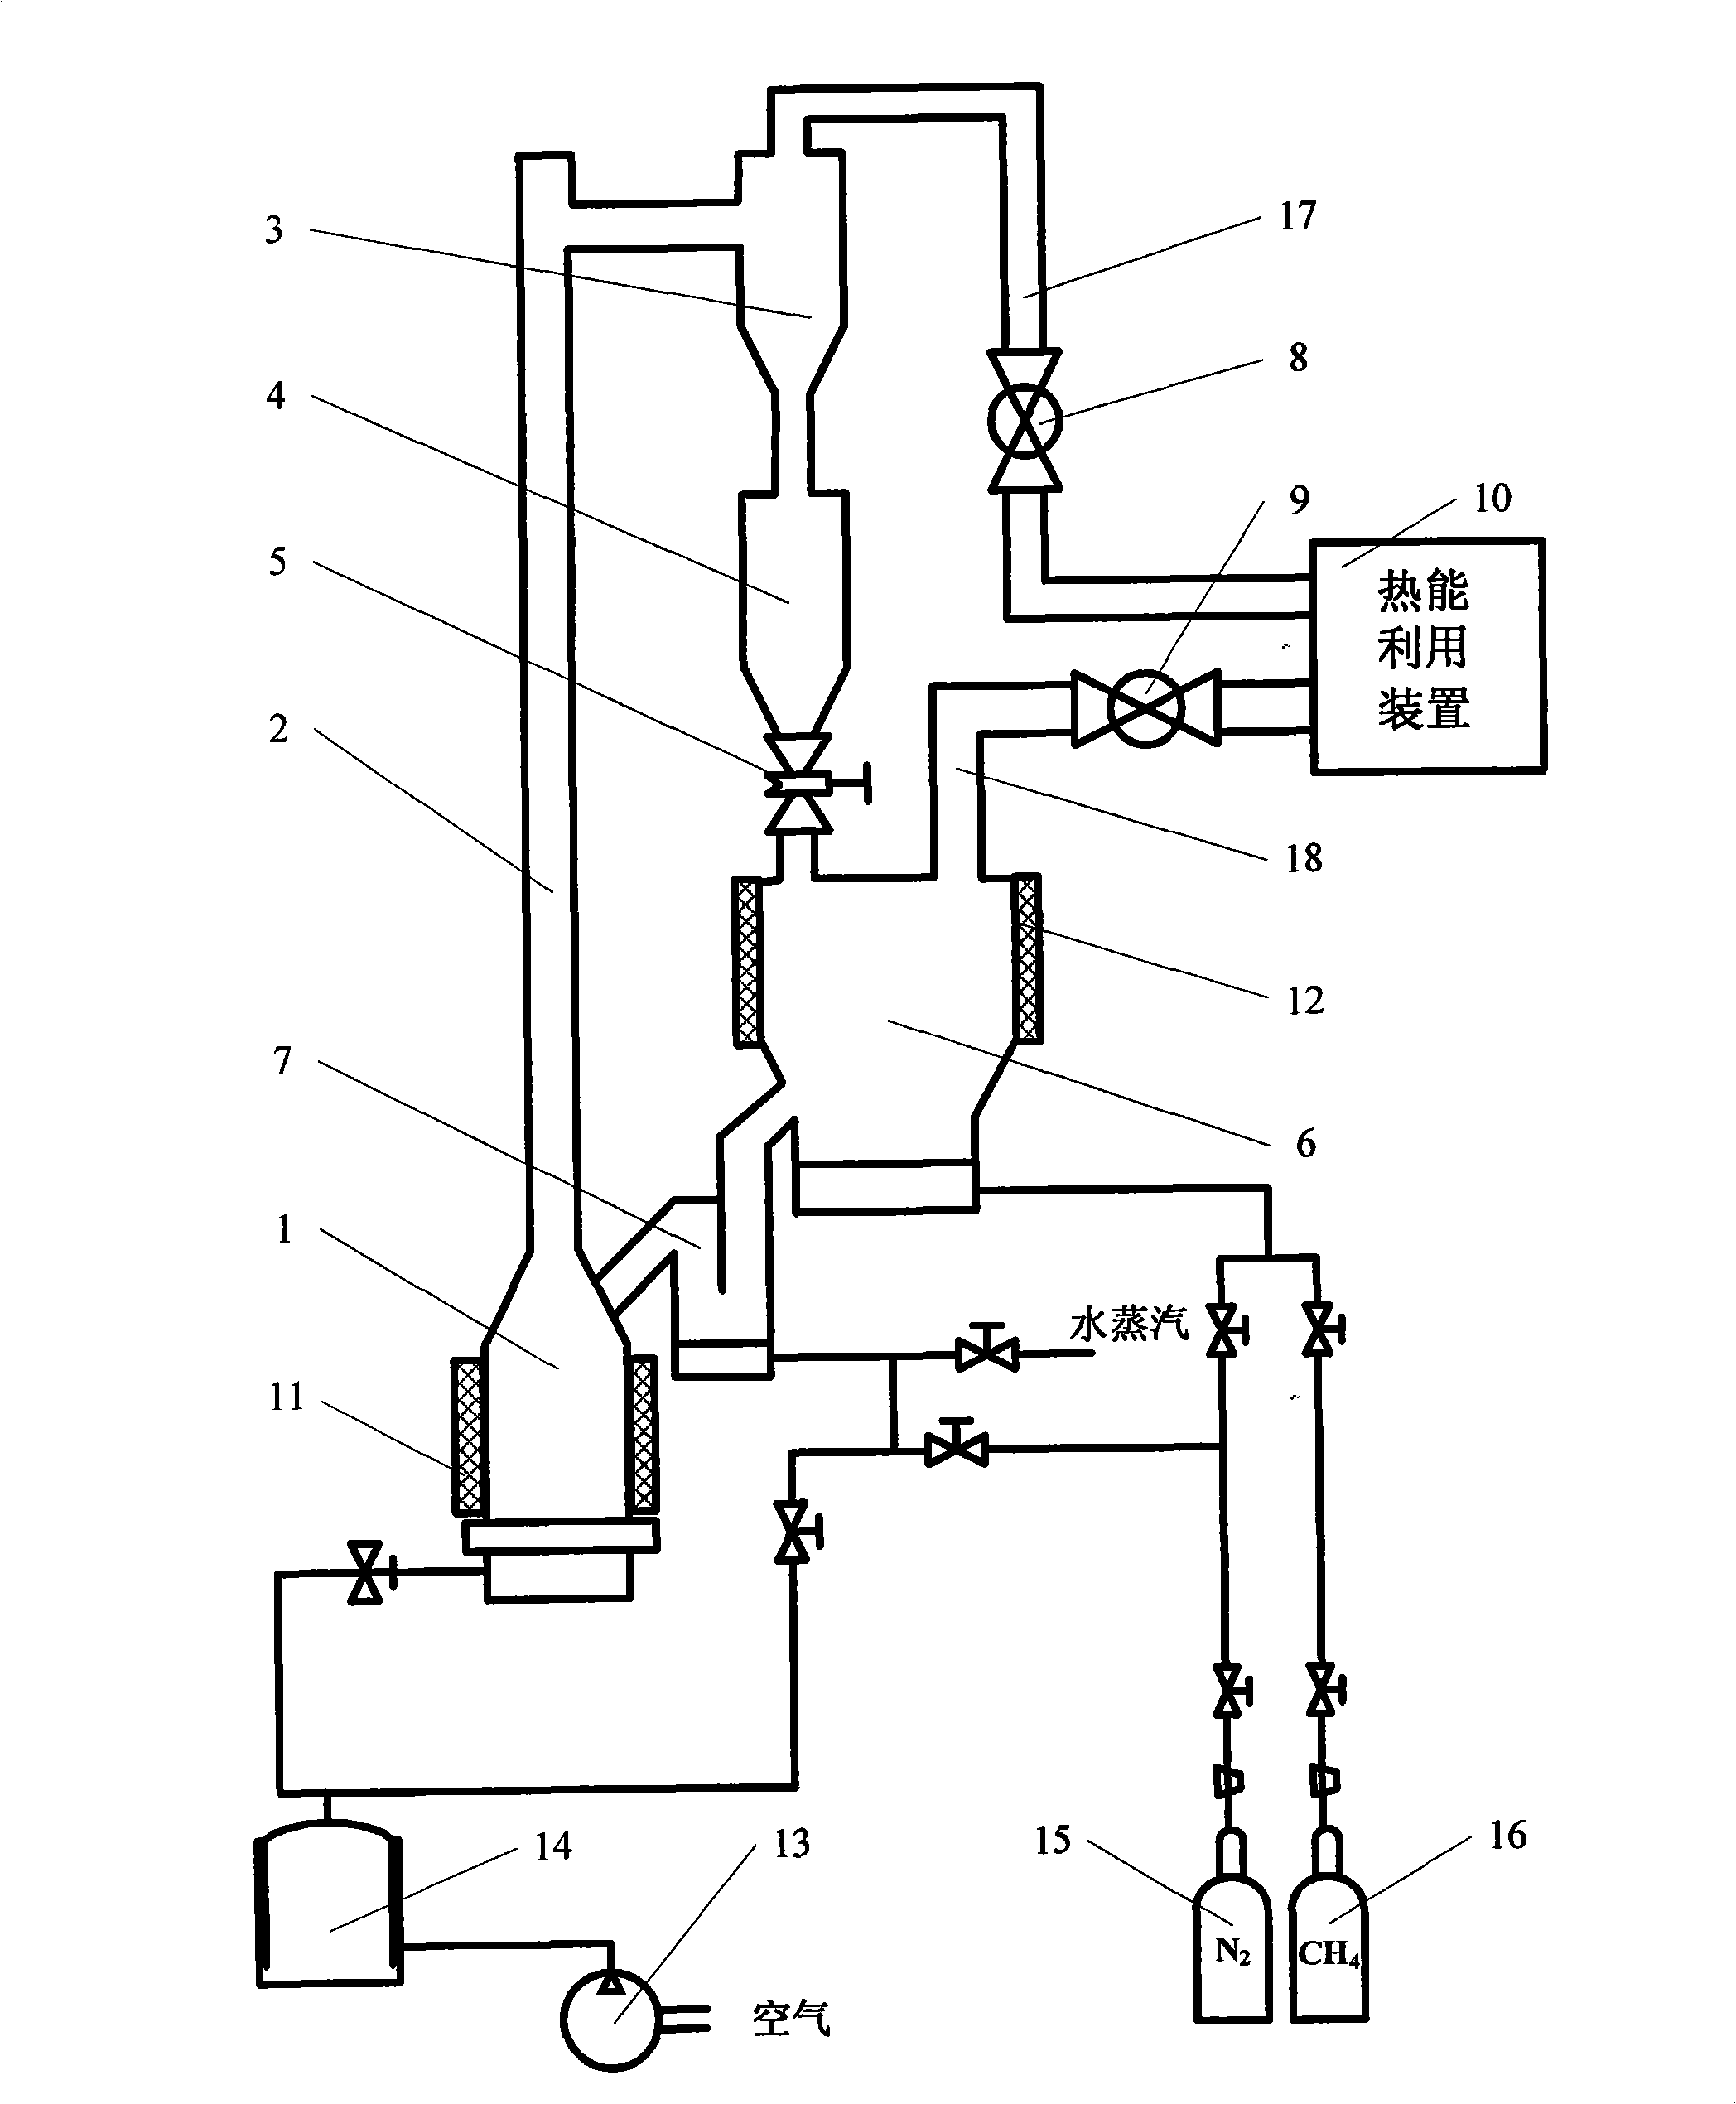 Double-circulating fluid bed system for chemical chain combustion